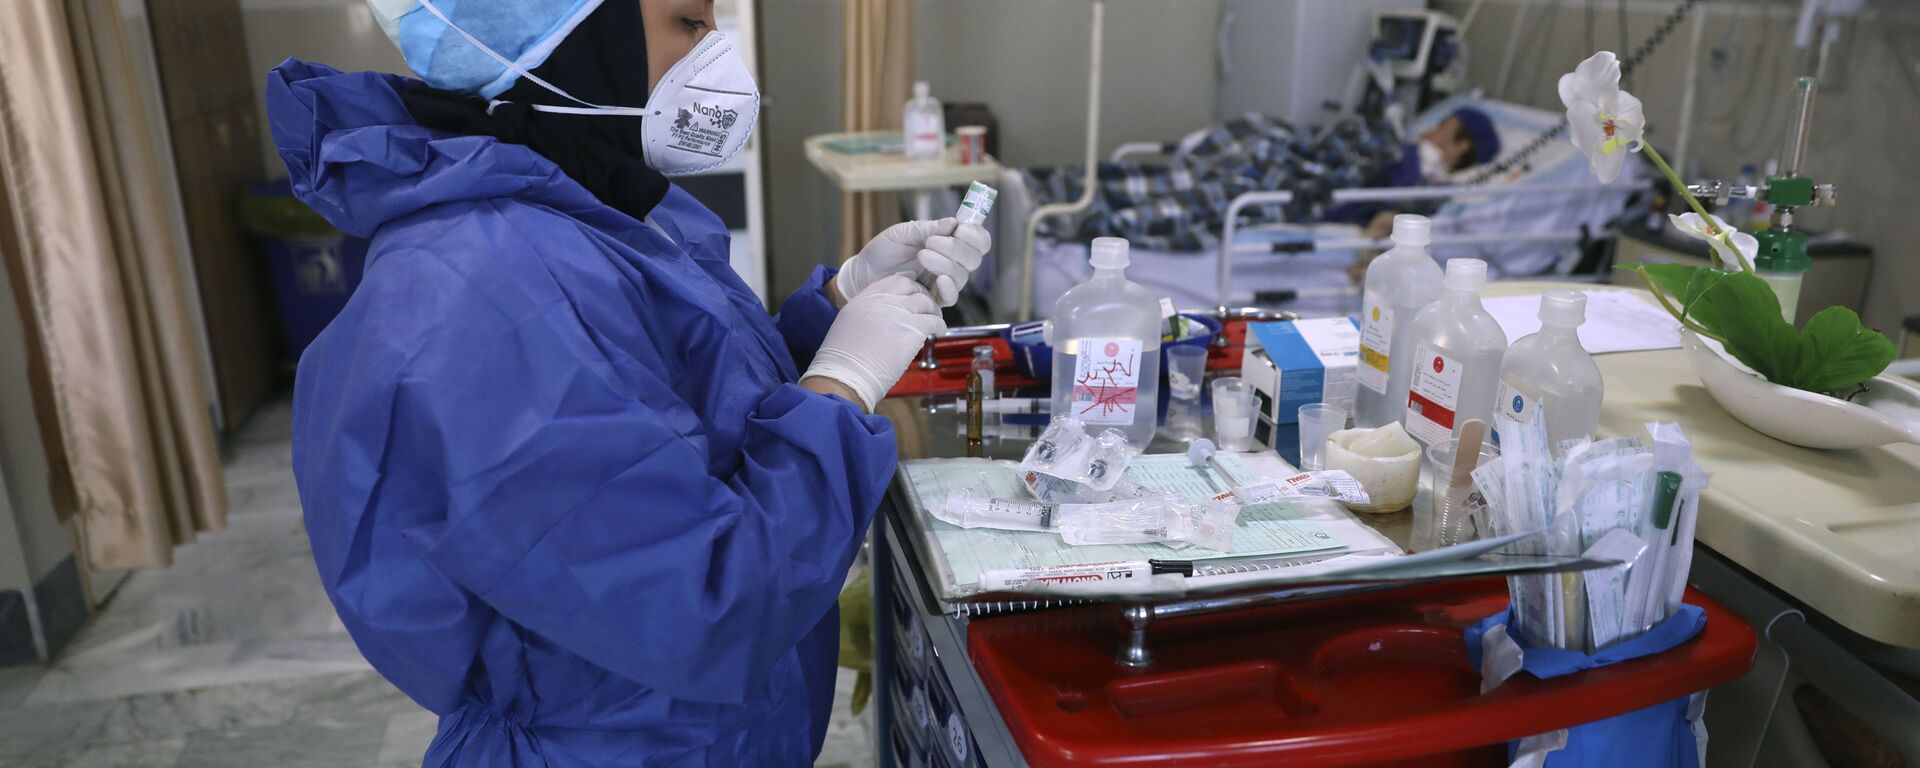 In this Tuesday, June 16, 2020, photo, a nurse prepares medicines for COVID-19 patients at the Shohadaye Tajrish Hospital in Tehran, Iran. After months of fighting the coronavirus, Iran only just saw its highest single-day spike in reported cases after Eid al-Fitr, the holiday that celebrates the end of Ramadan.  - Sputnik International, 1920, 29.04.2021